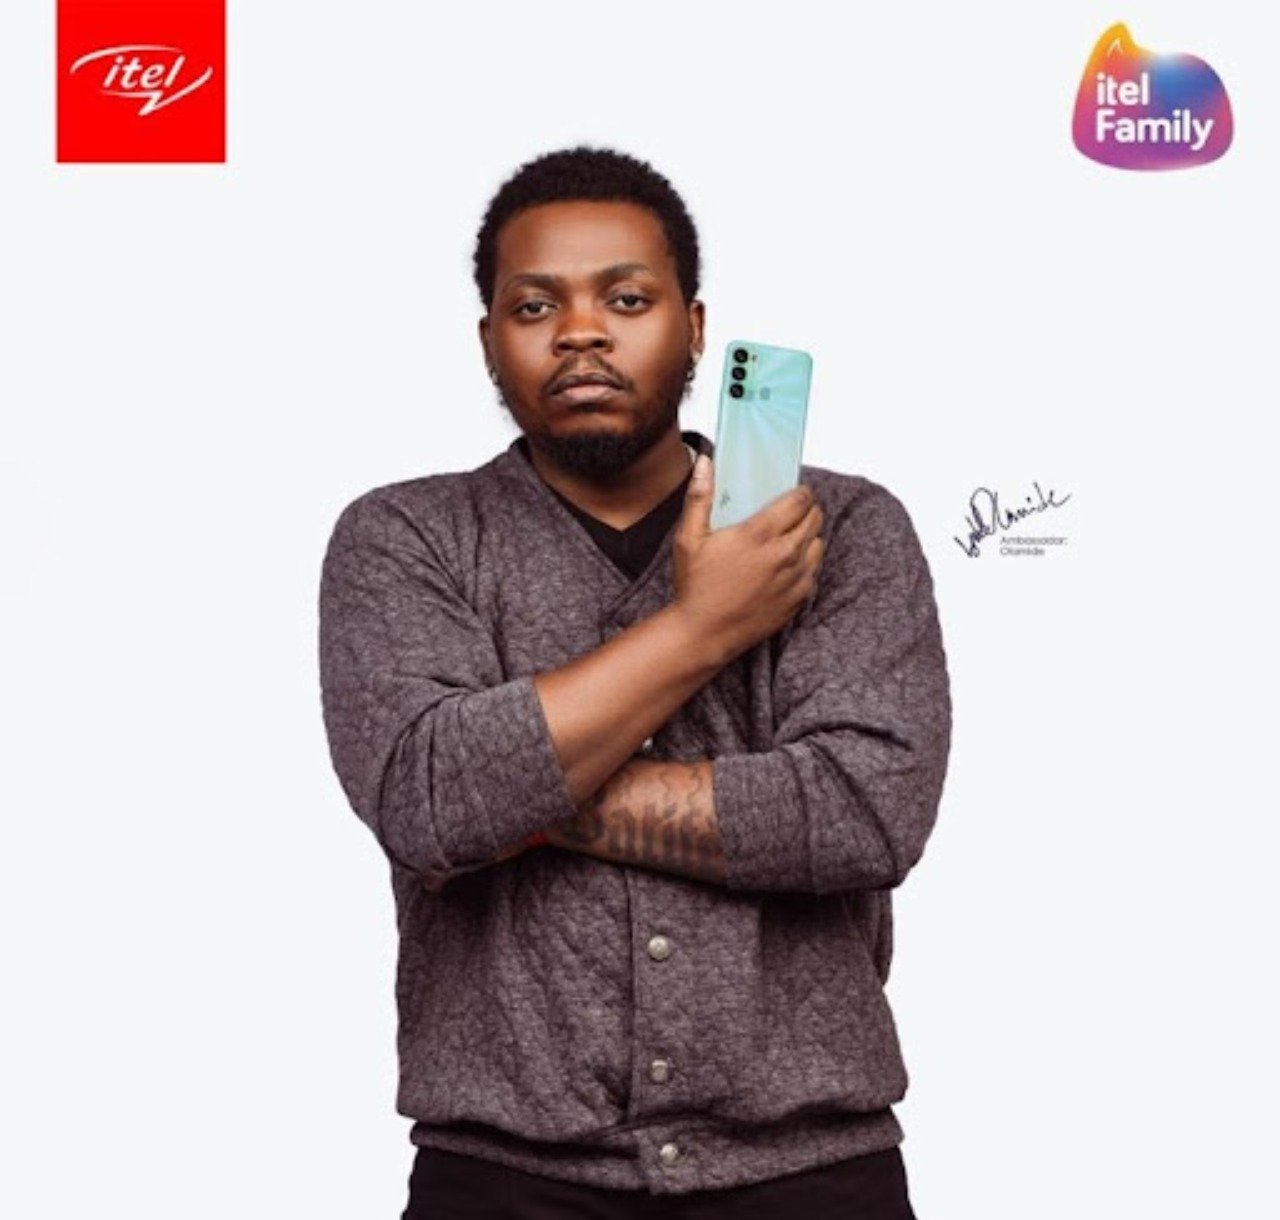 itel S17: Big battery, big screen, beautiful design, other amazing features